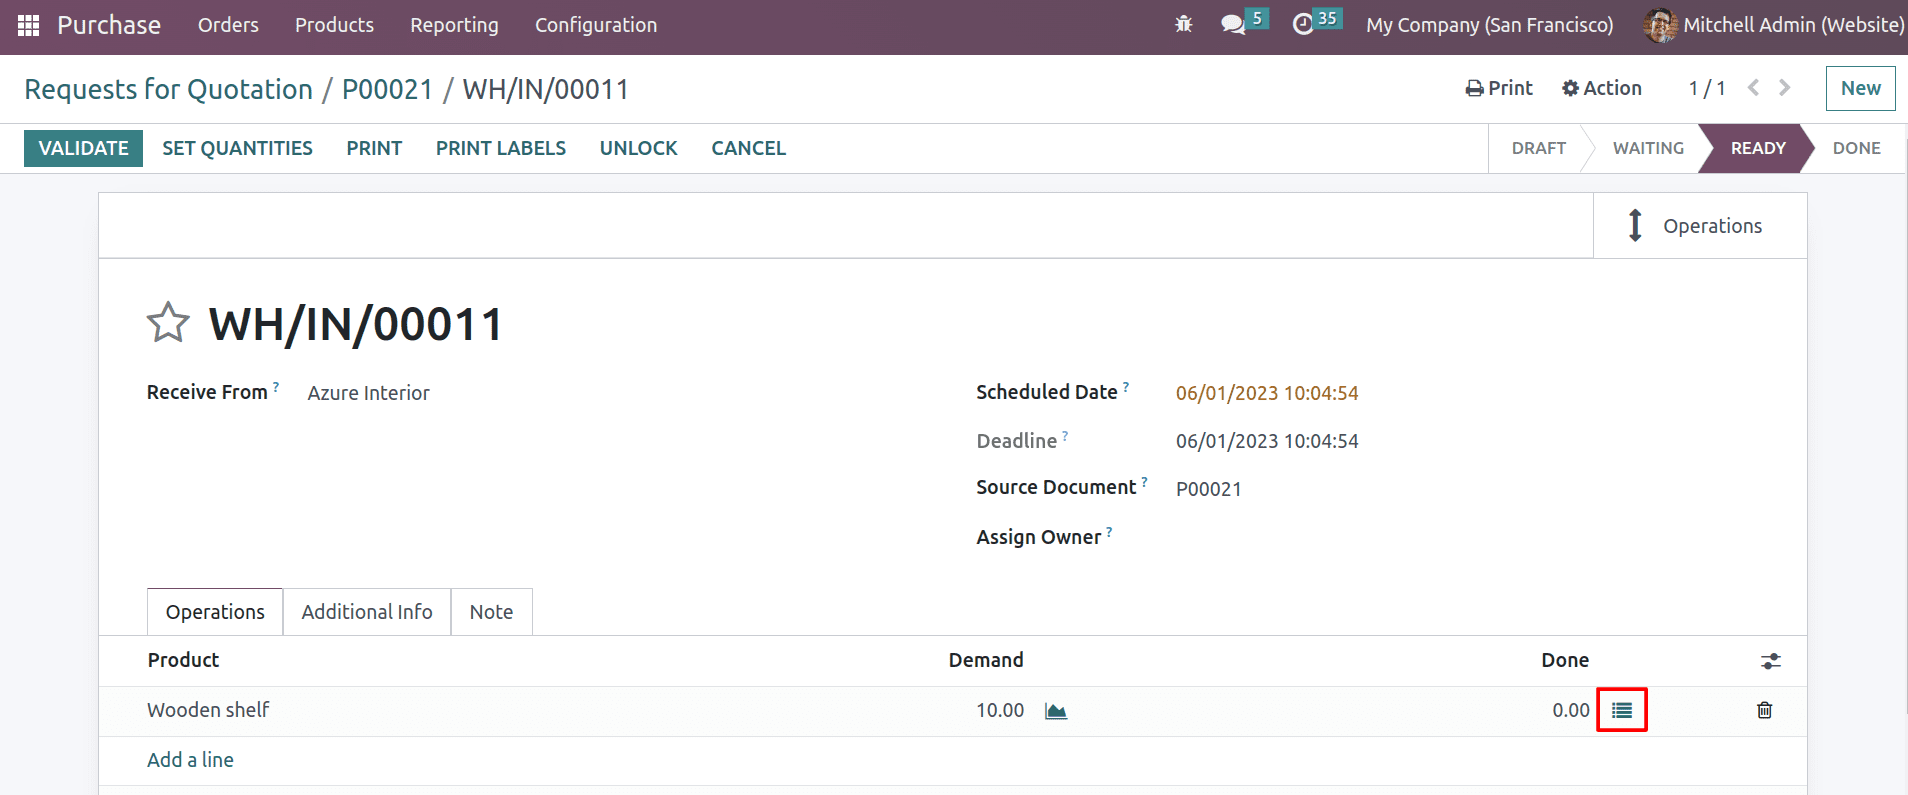 How to Configure Lots/Serial Numbers & Product Traceability in Odoo 16-cybrosys